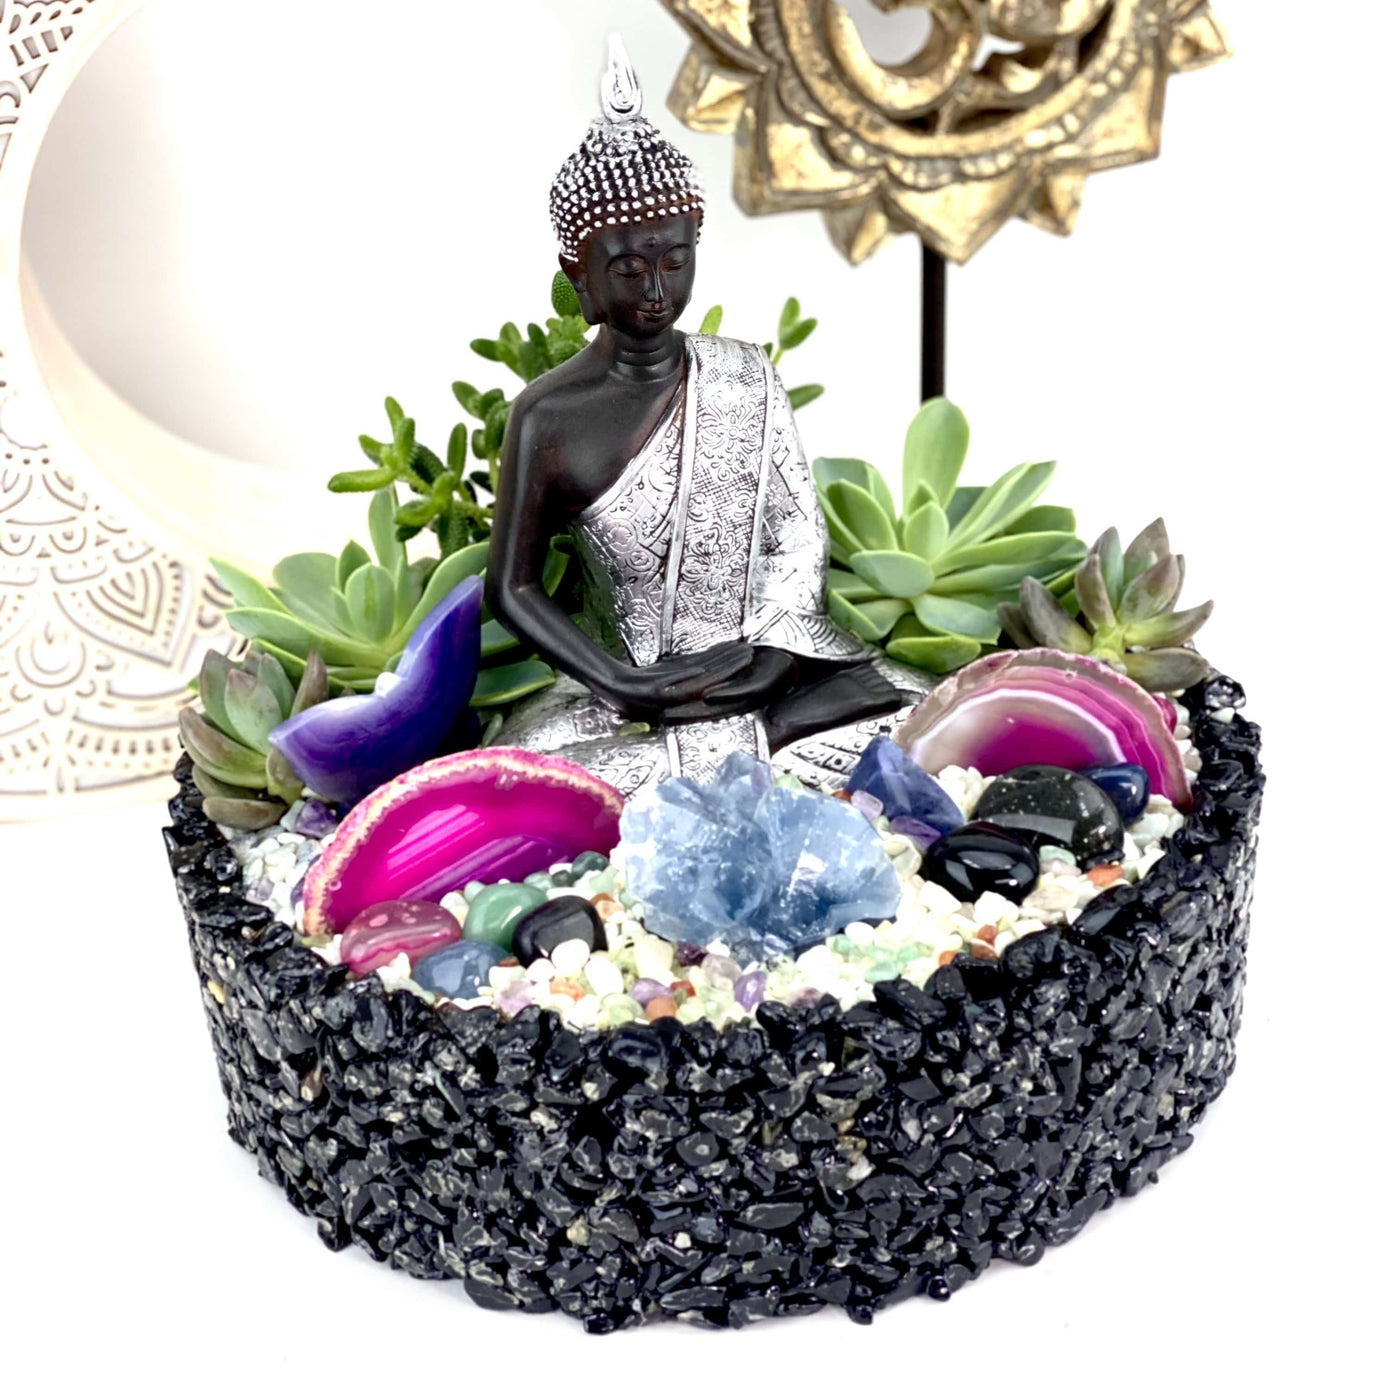 Tumbled Stone Bowl  - tourmaline with buddah and plants in it